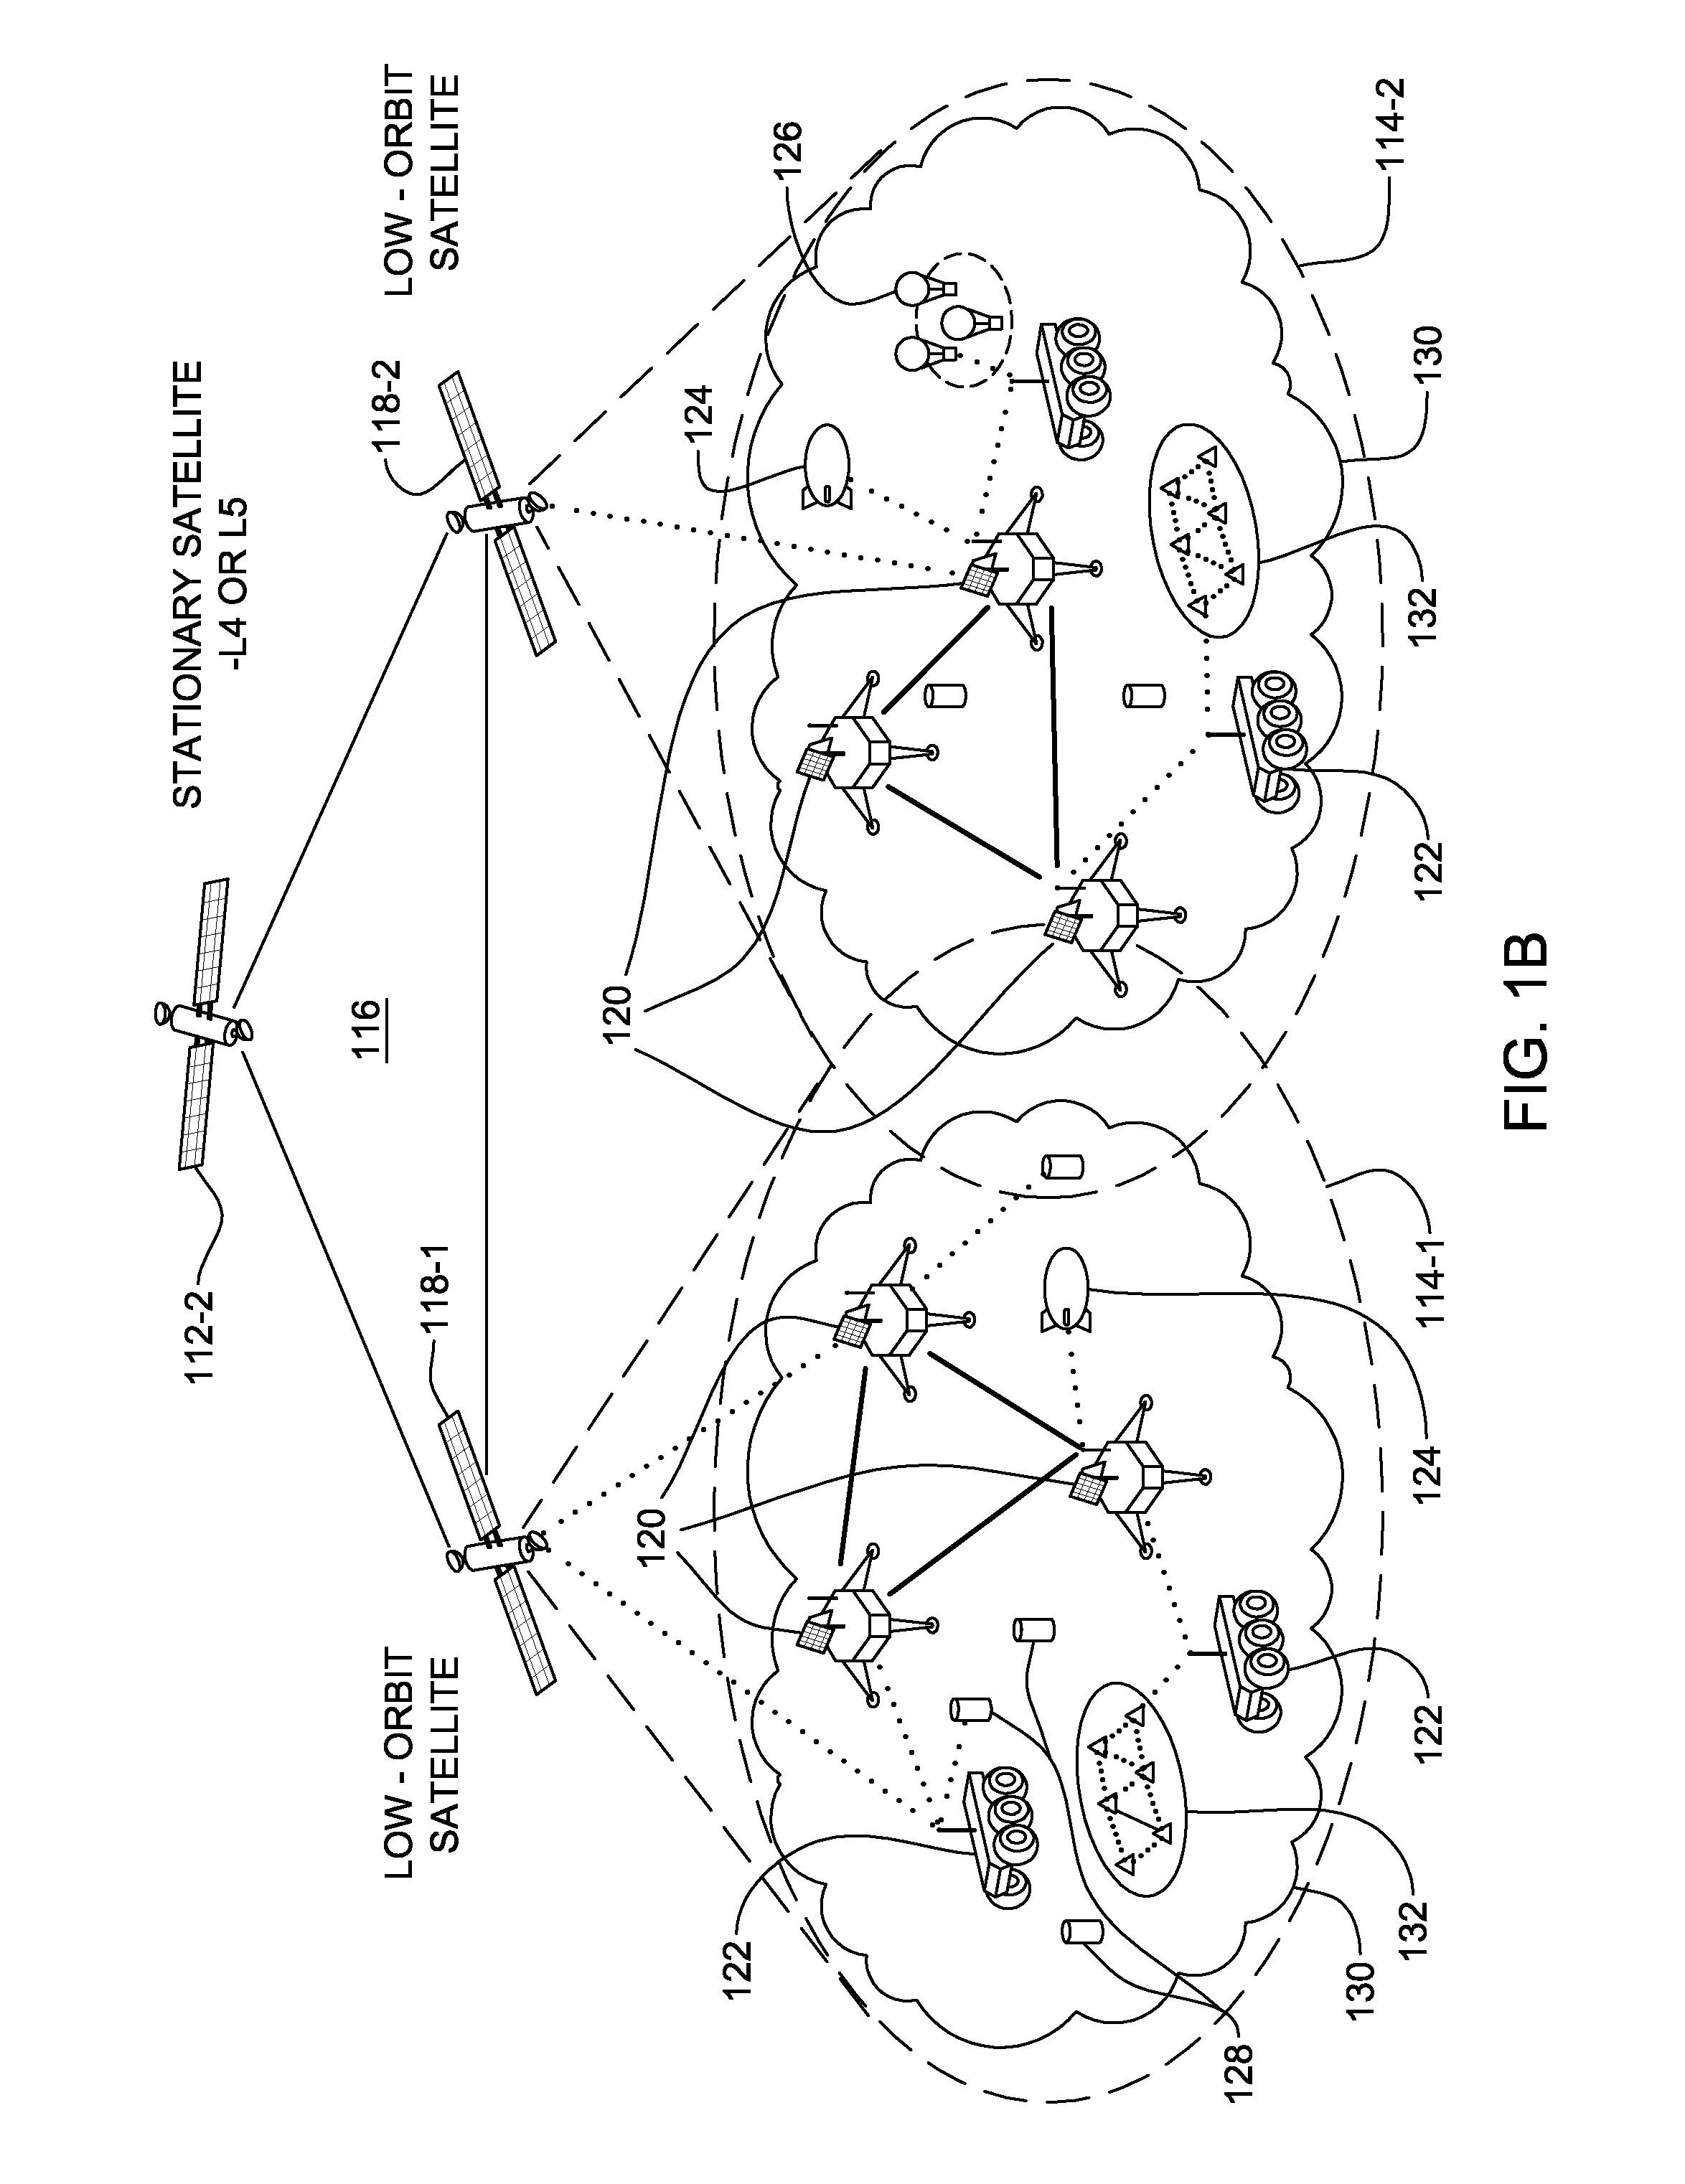 Remote gateway selection in an interplanetary communications network and method of selecting and handing over remote gateways